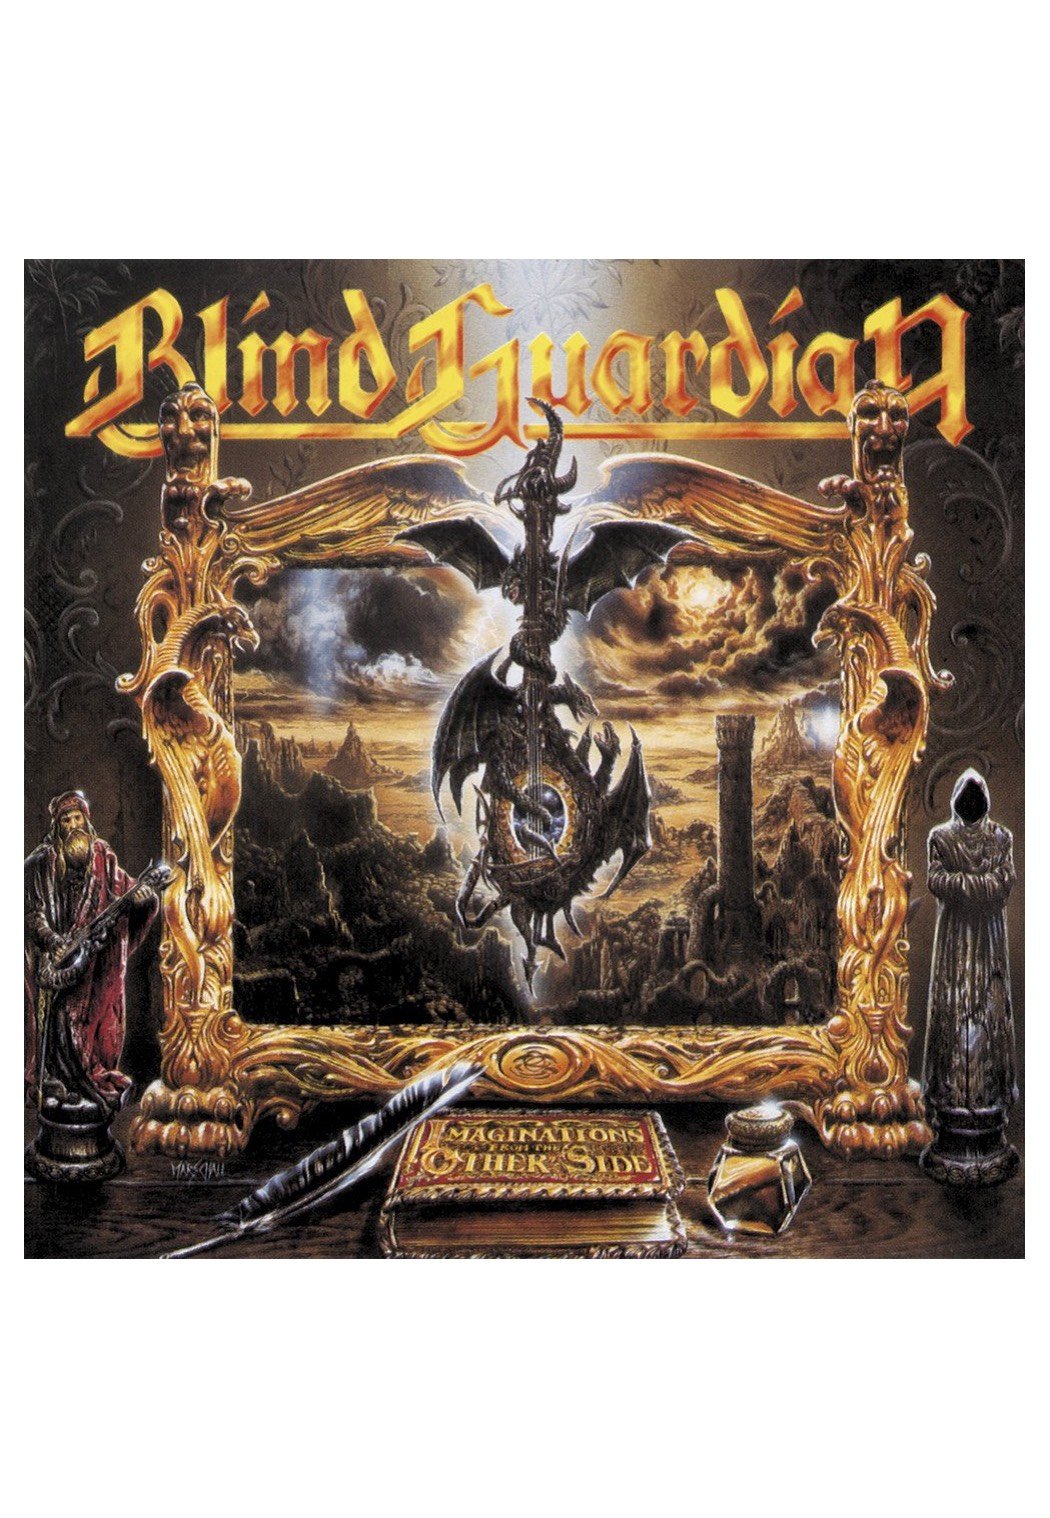 Blind Guardian - Imaginations From The Other Side (Remastered 2007) - CD